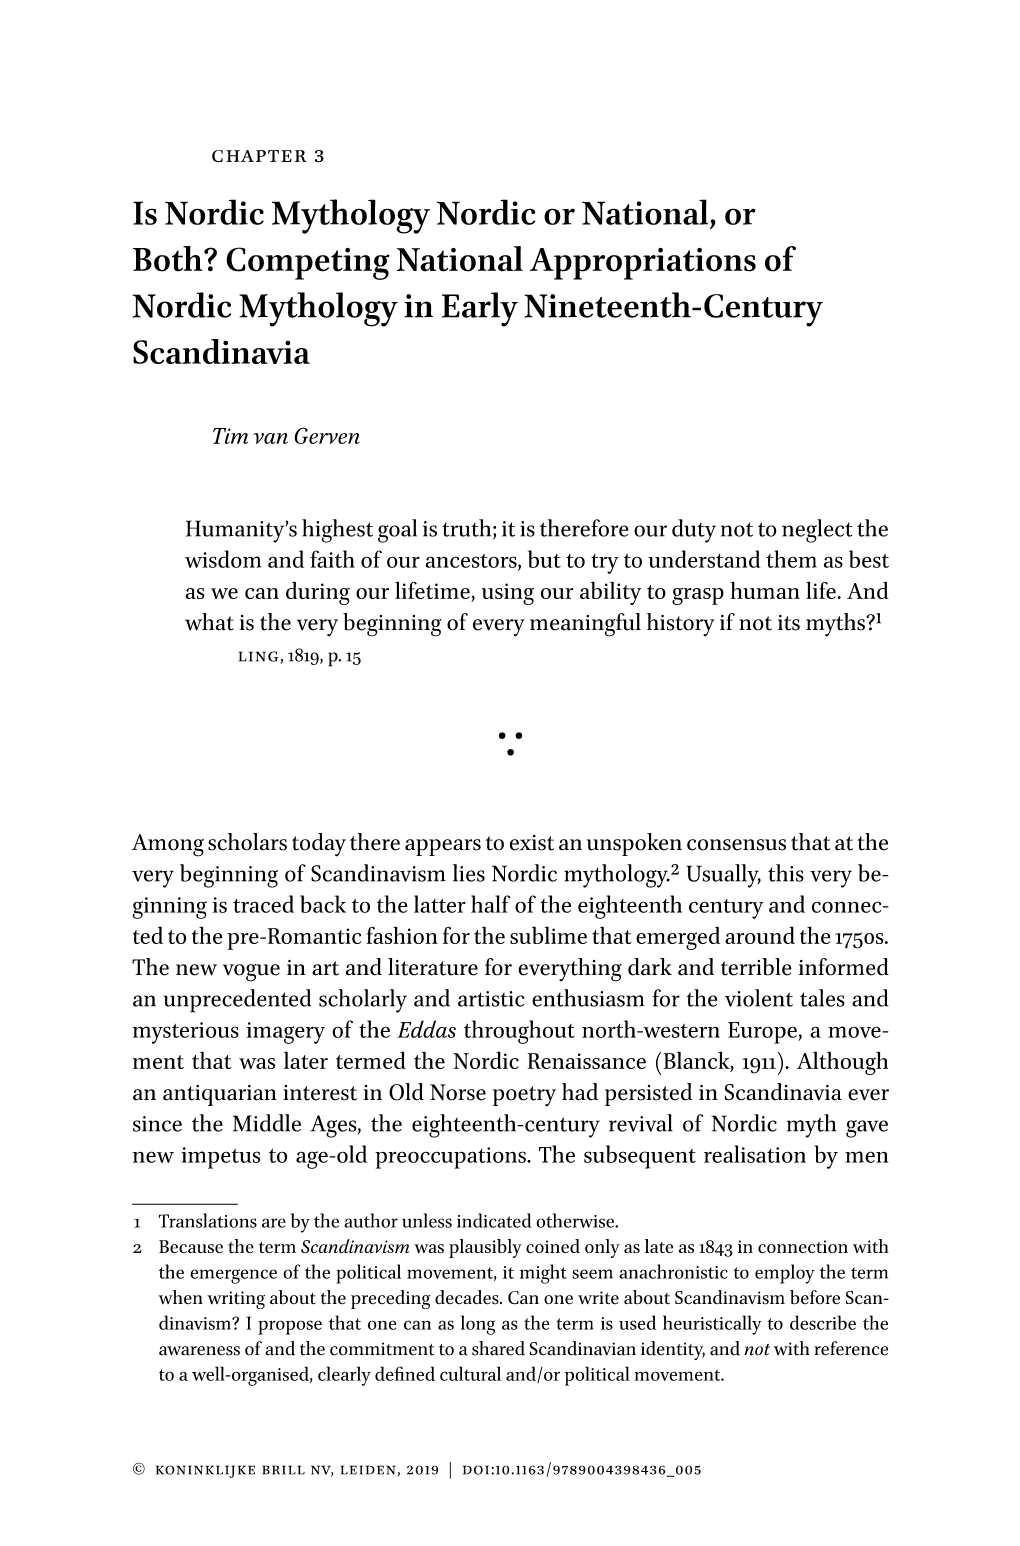 Is Nordic Mythology Nordic Or National, Or Both? Competing National Appropriations of Nordic Mythology in Early Nineteenth-Century Scandinavia